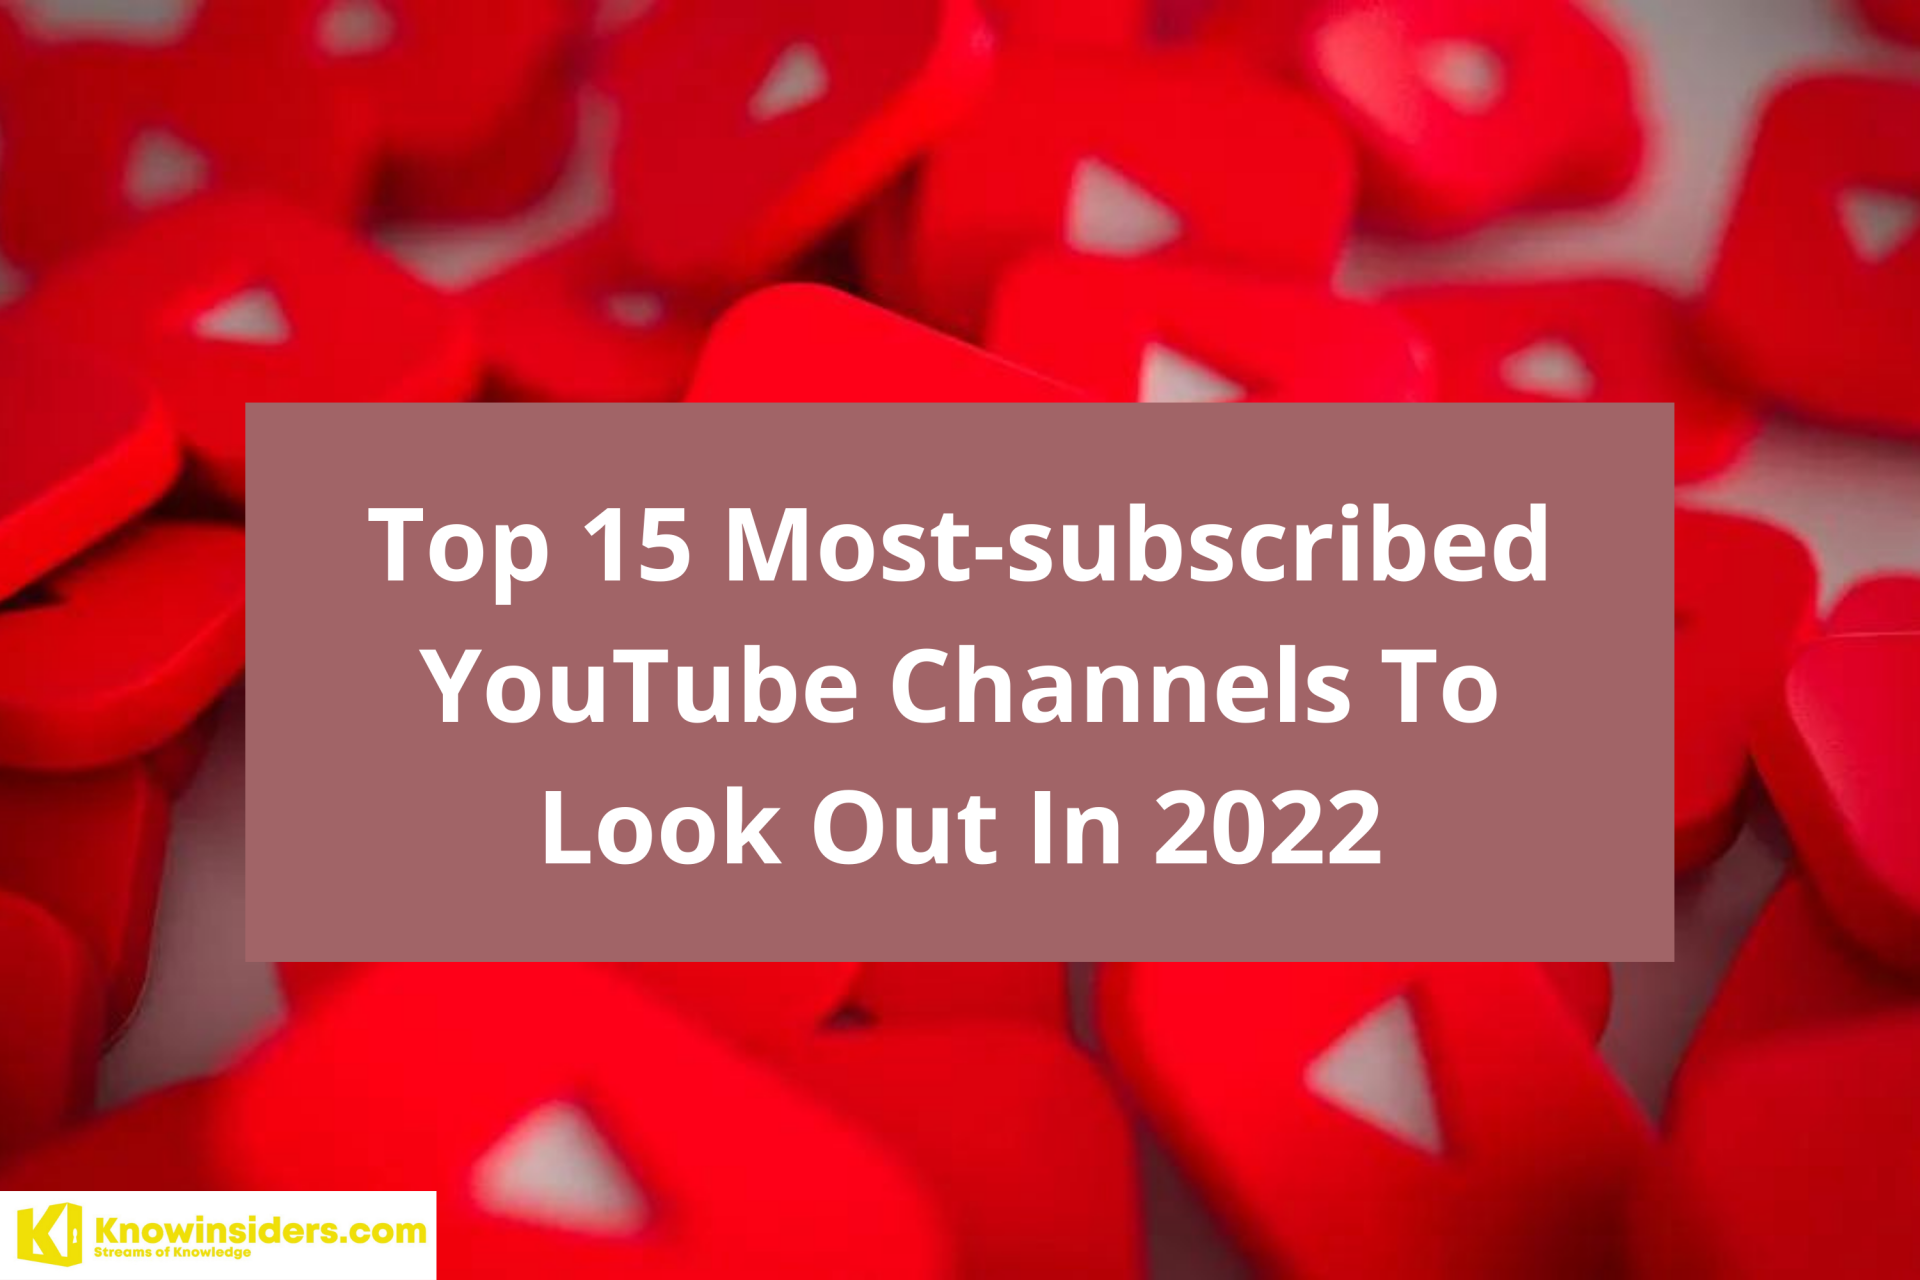 Top 15 Most-subscribed YouTube Channels To Look Out In 2022